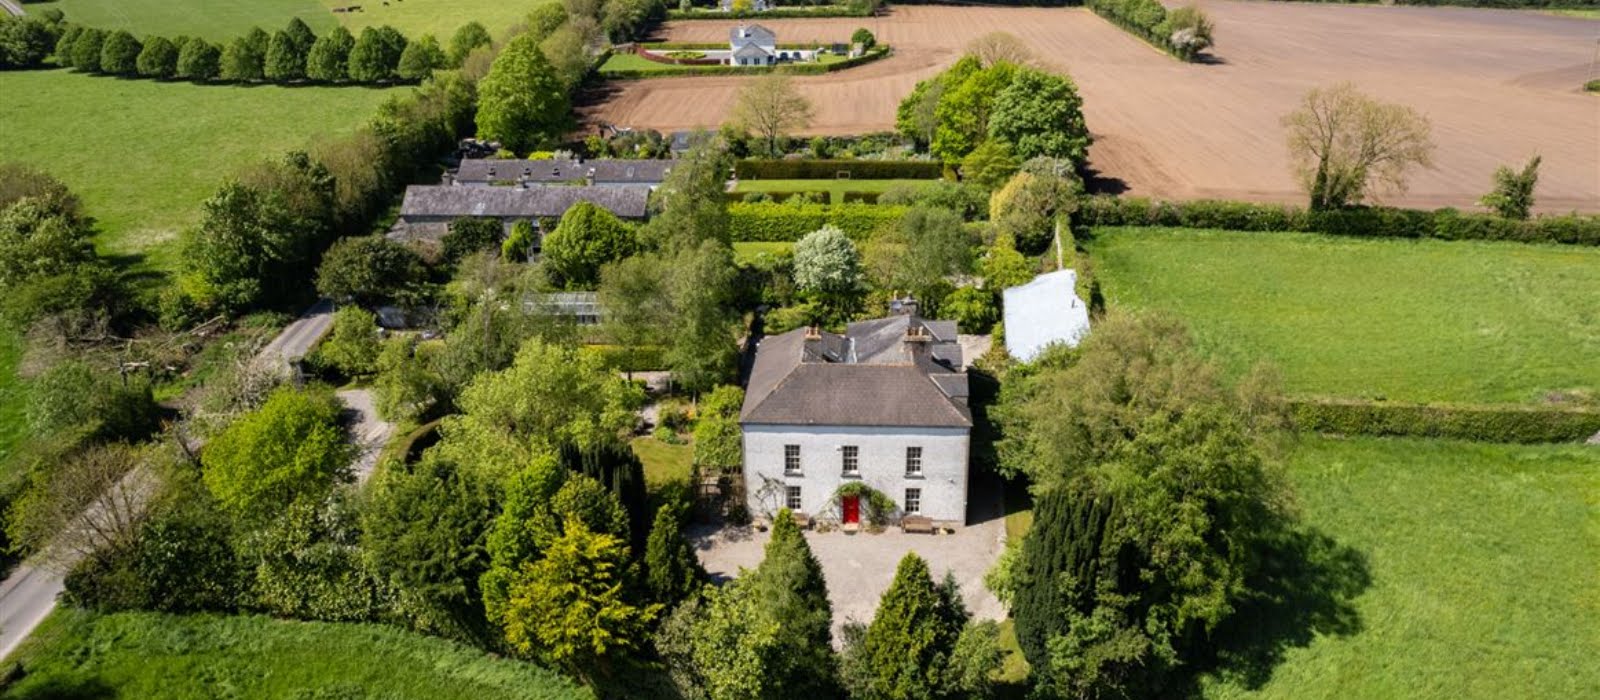 This beautiful Georgian residence is on the market for €775,000